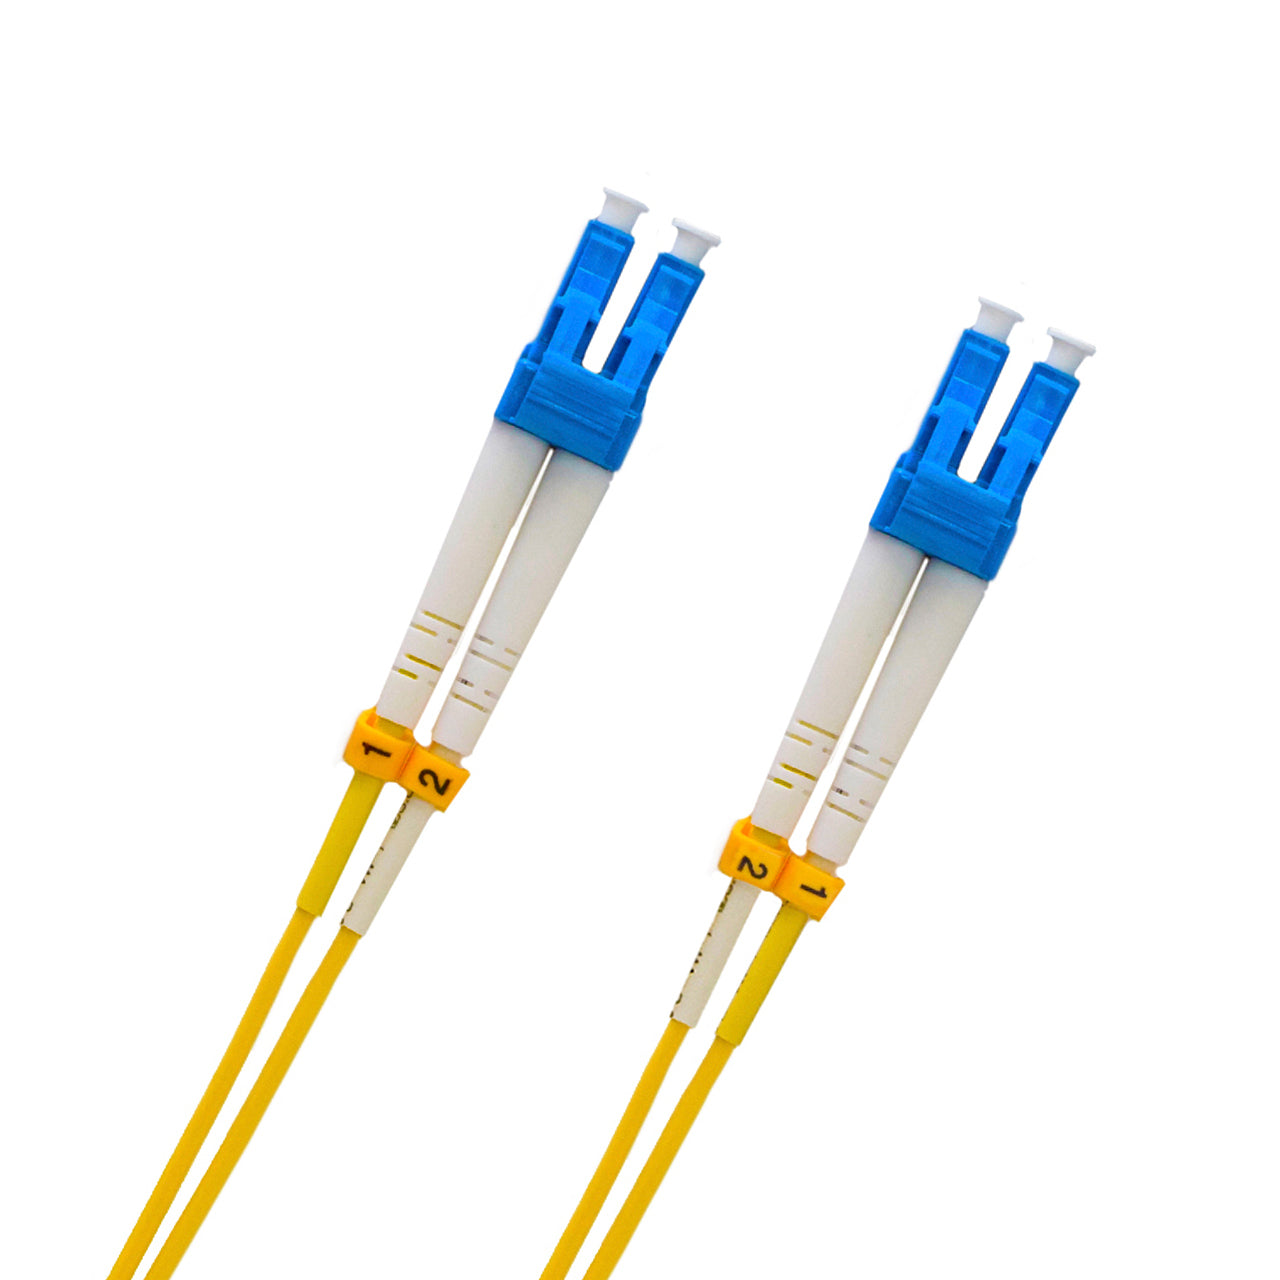 2 Meter LC/LC 9/125 Single-mode OS1 Duplex Fiber Patch Cable